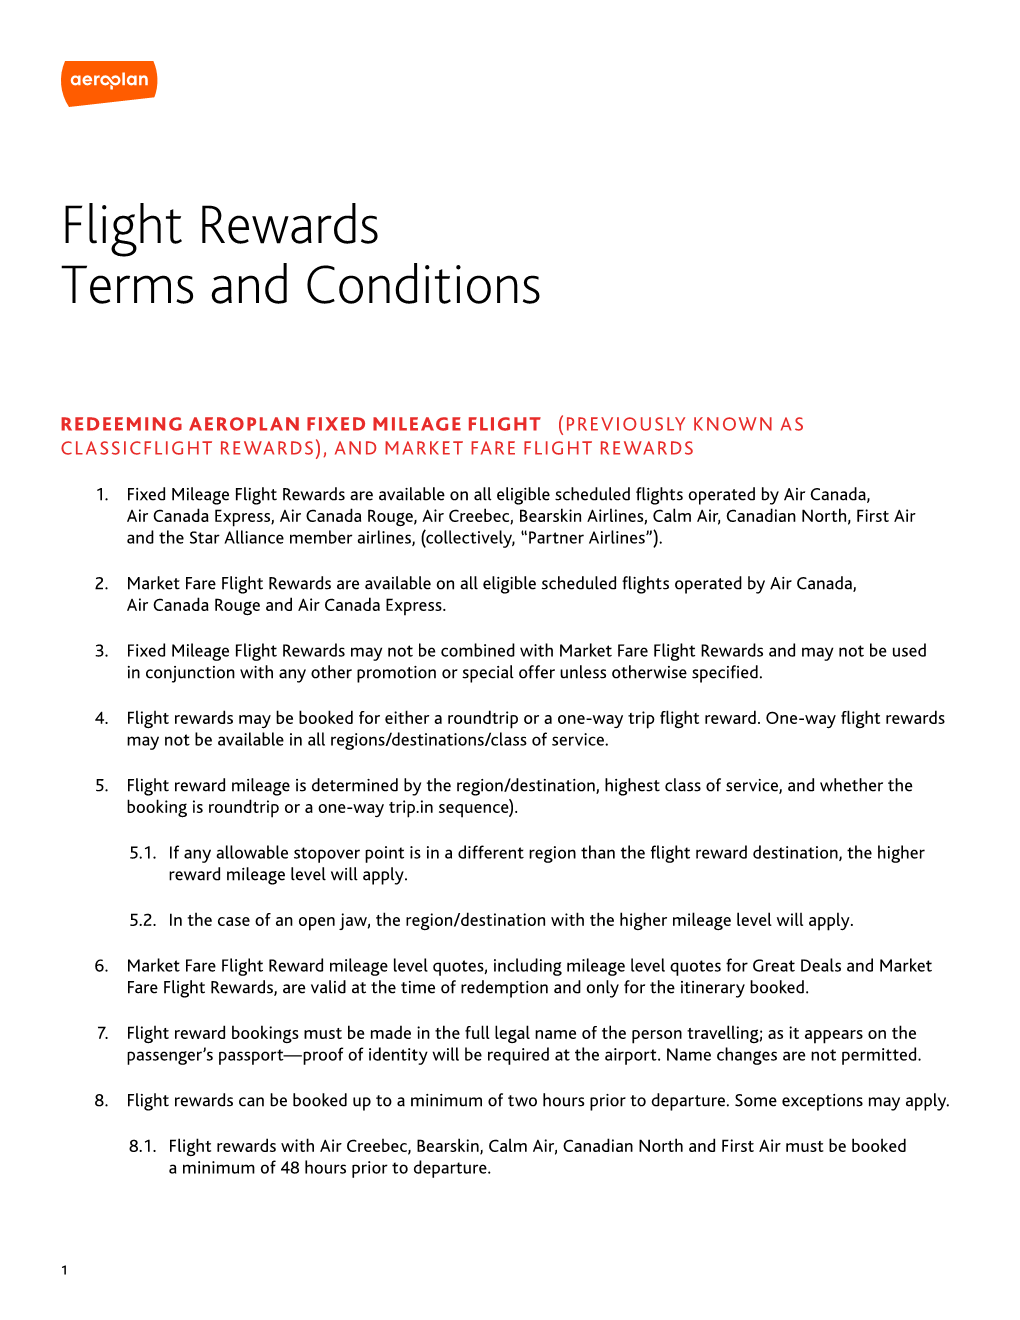 Flight Rewards Terms and Conditions